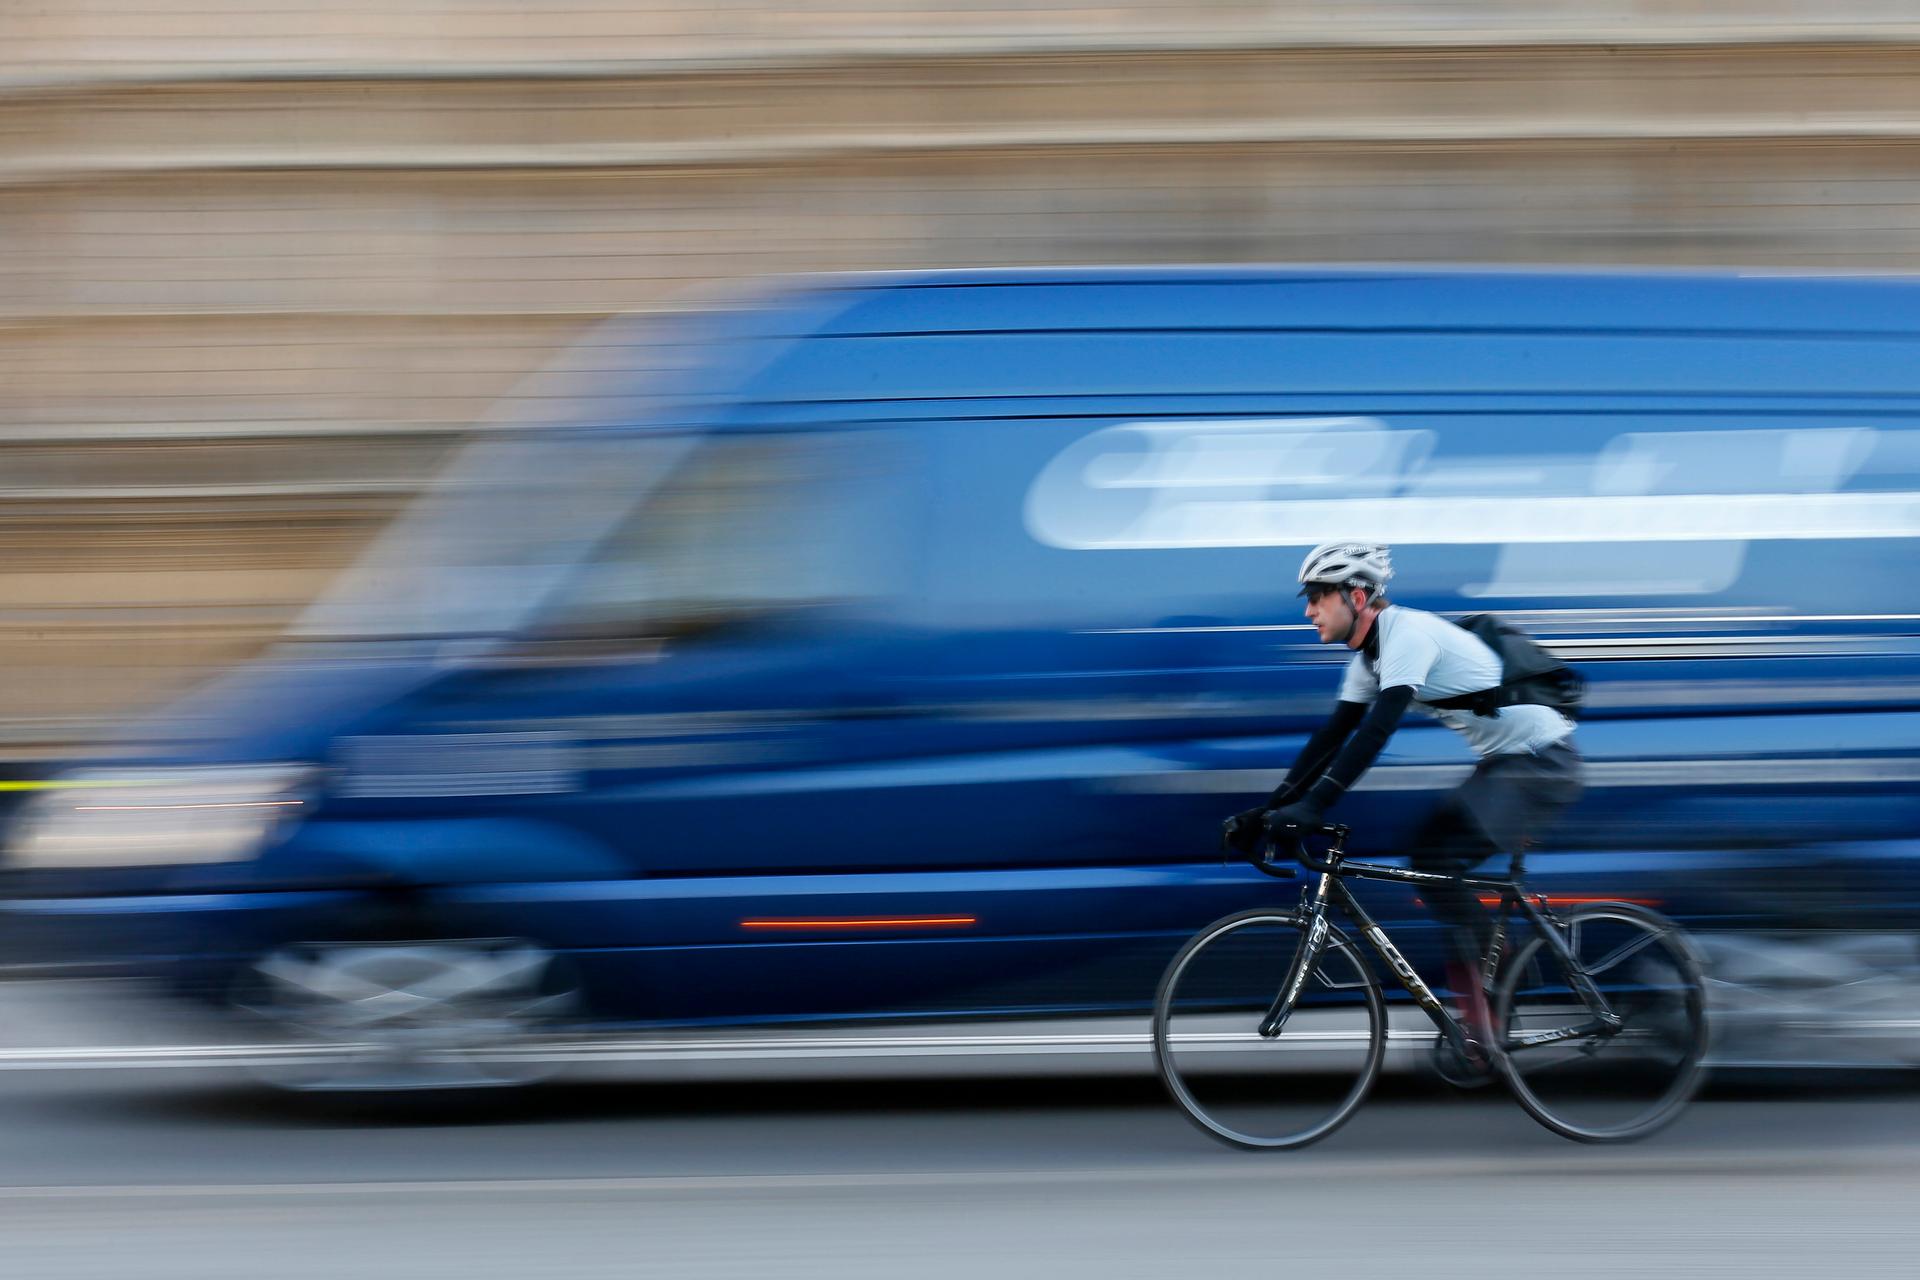 A commuter cycles in central London on November 15, 2013. The deaths of five cyclists in just nine days on the road this month in London have prompted calls for the city to speed up road safety measures in the capital.